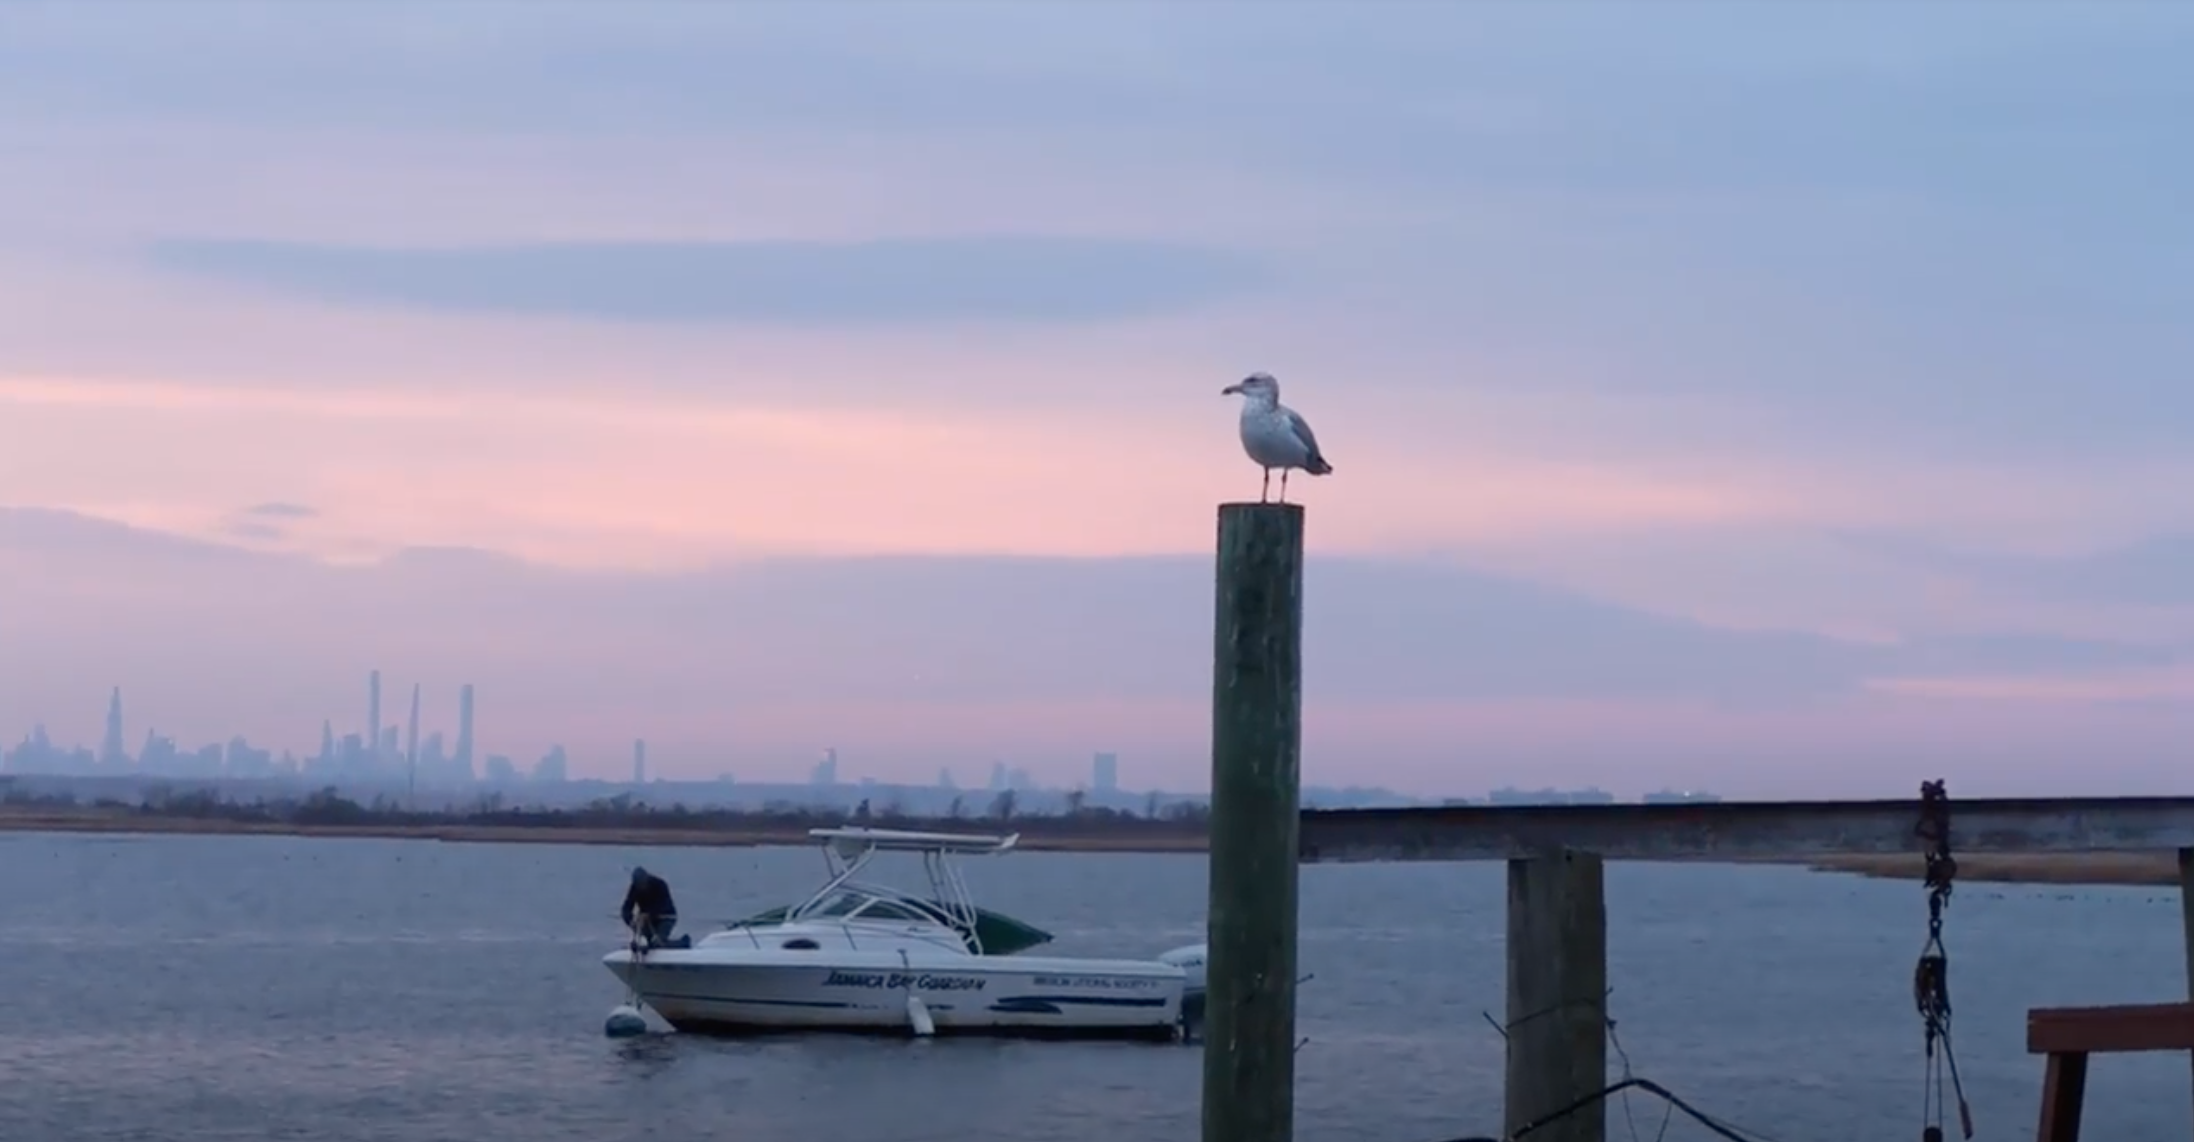 The view of Jamaica Bay with the Manhattan skyline in the background from the dock of Don Riepe's home in Broad Channel, Queens. Riepe is on his boat, the Oystercatcher, as a seagull looks on.